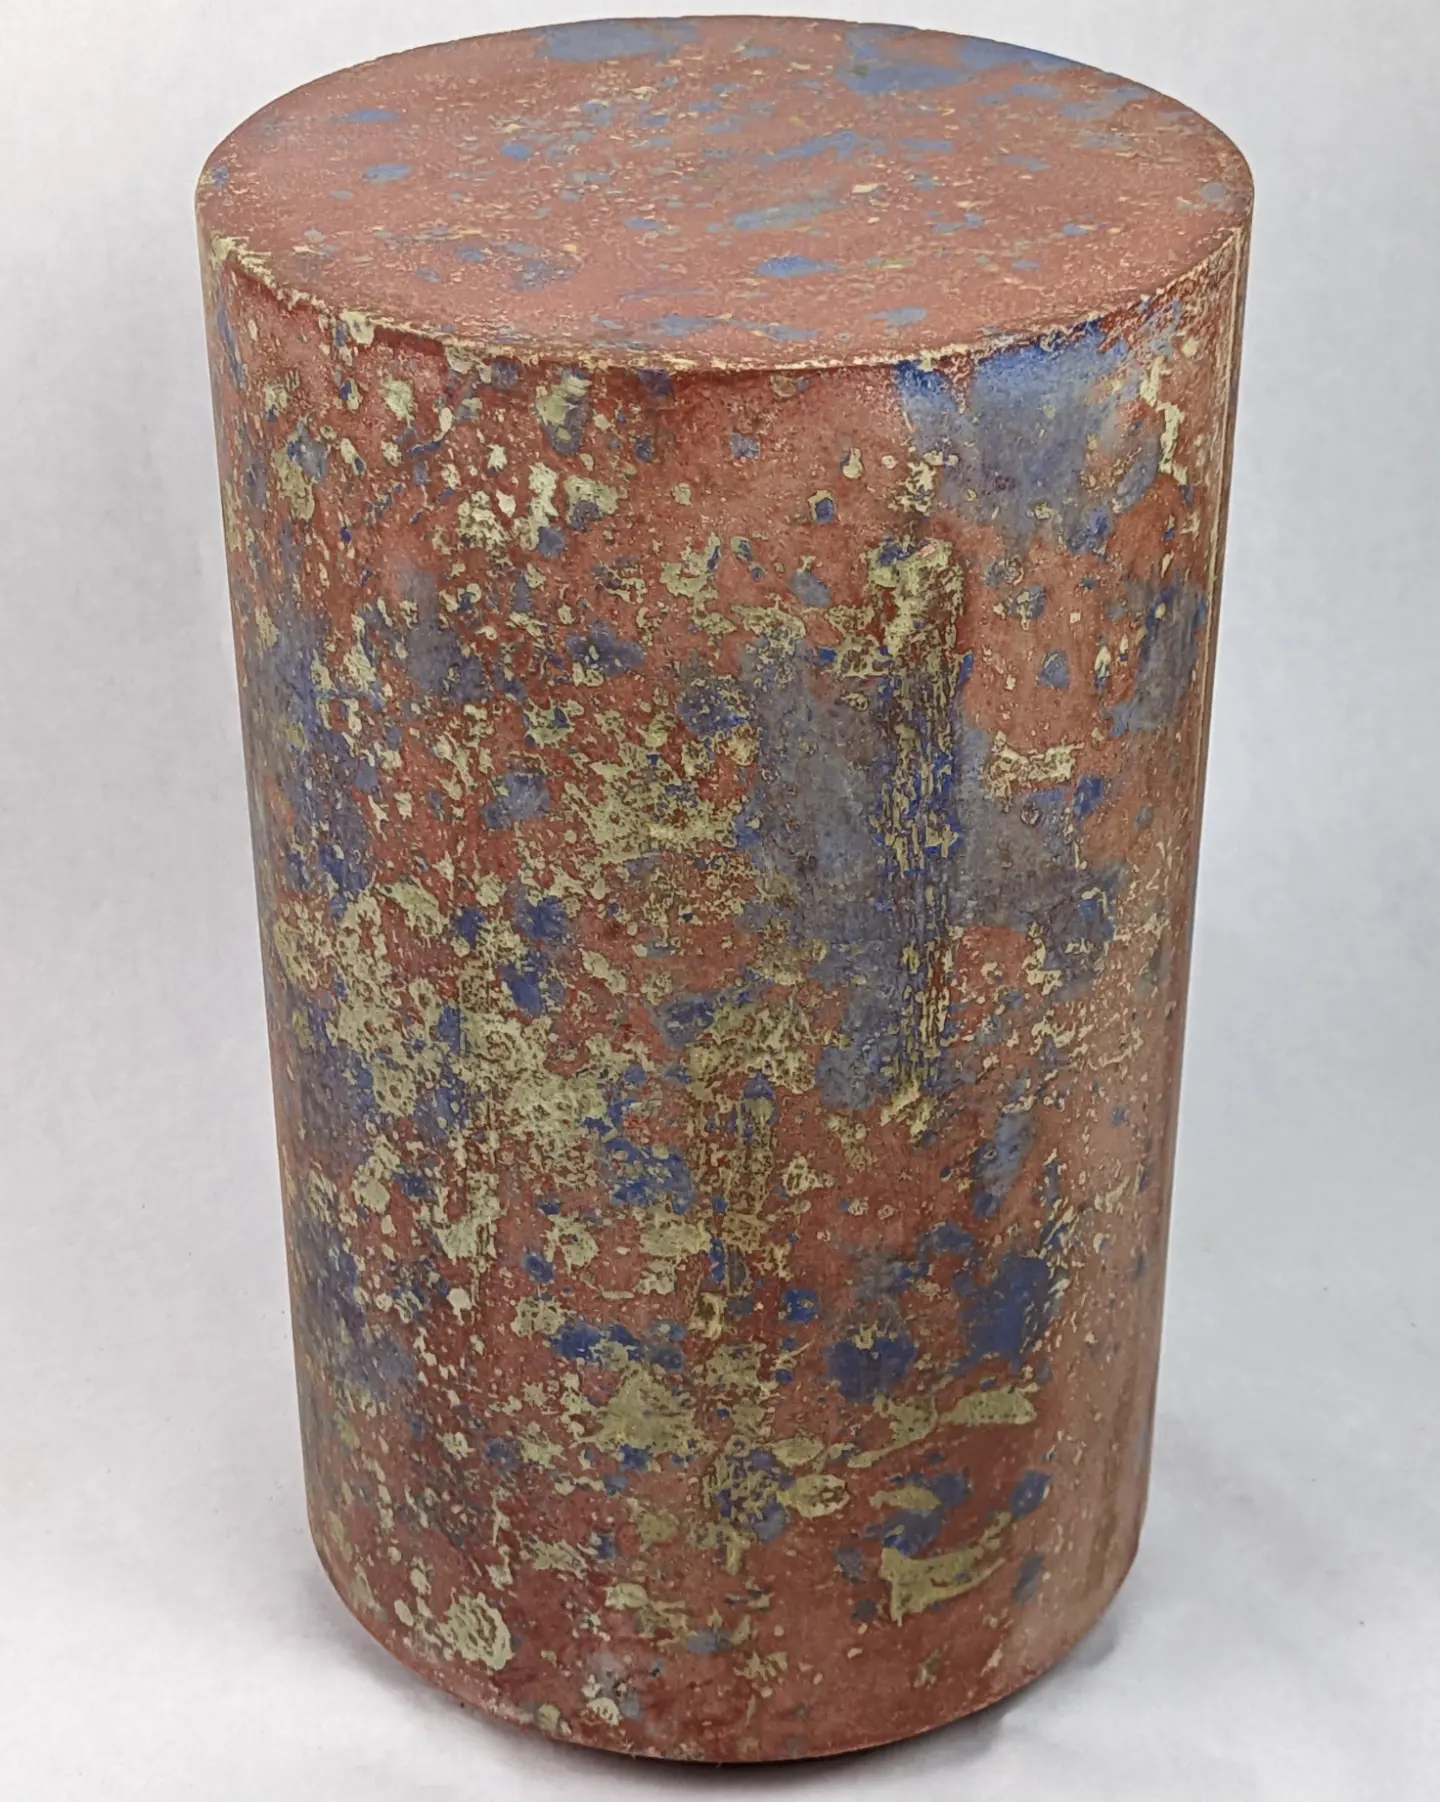 red and blue concrete side table 12" x 20" tall with Pollock-like splatter pattern